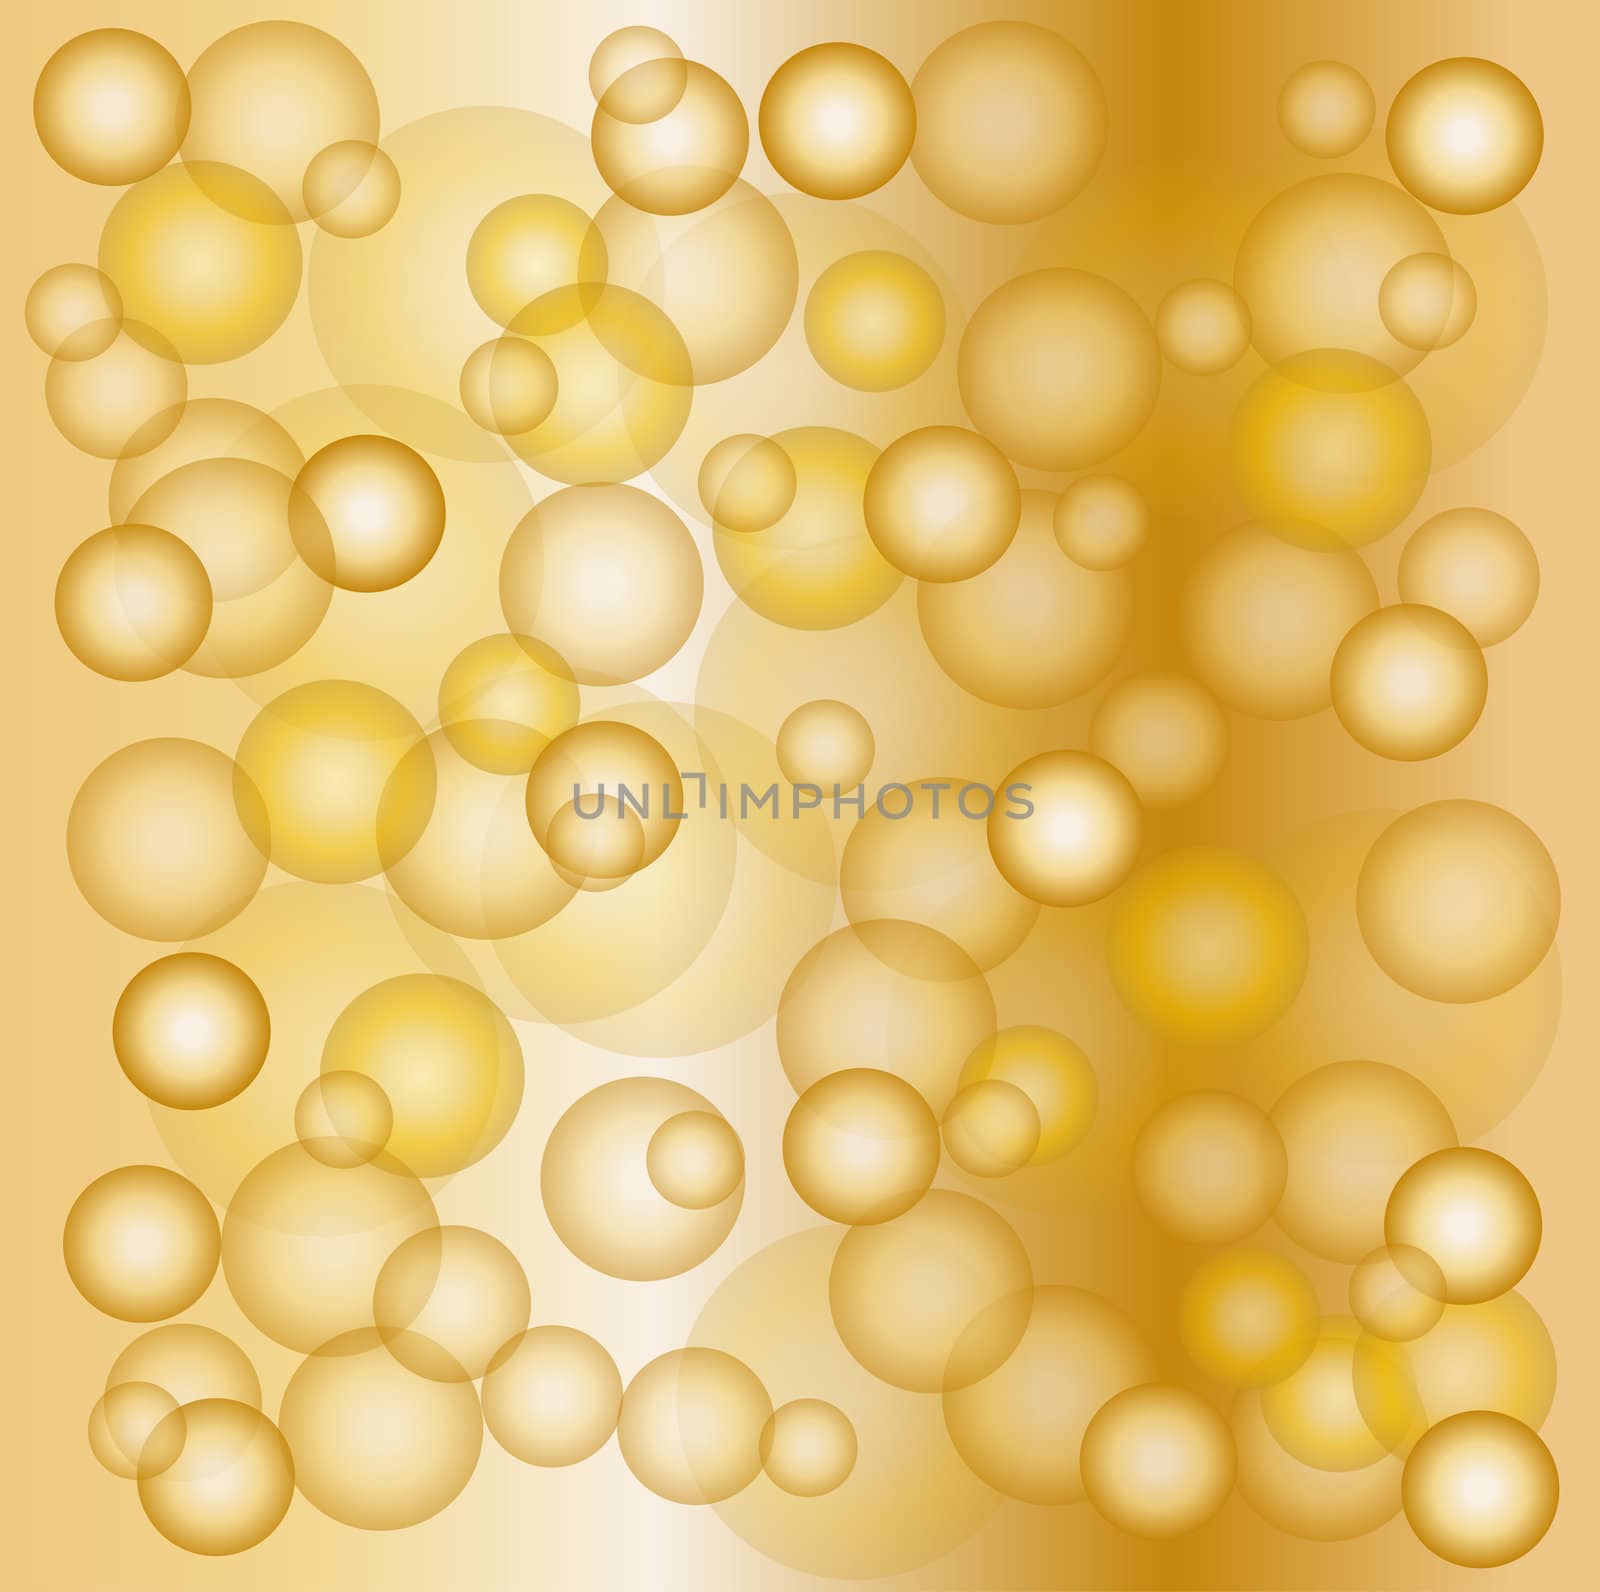 Background with bubbles by peromarketing